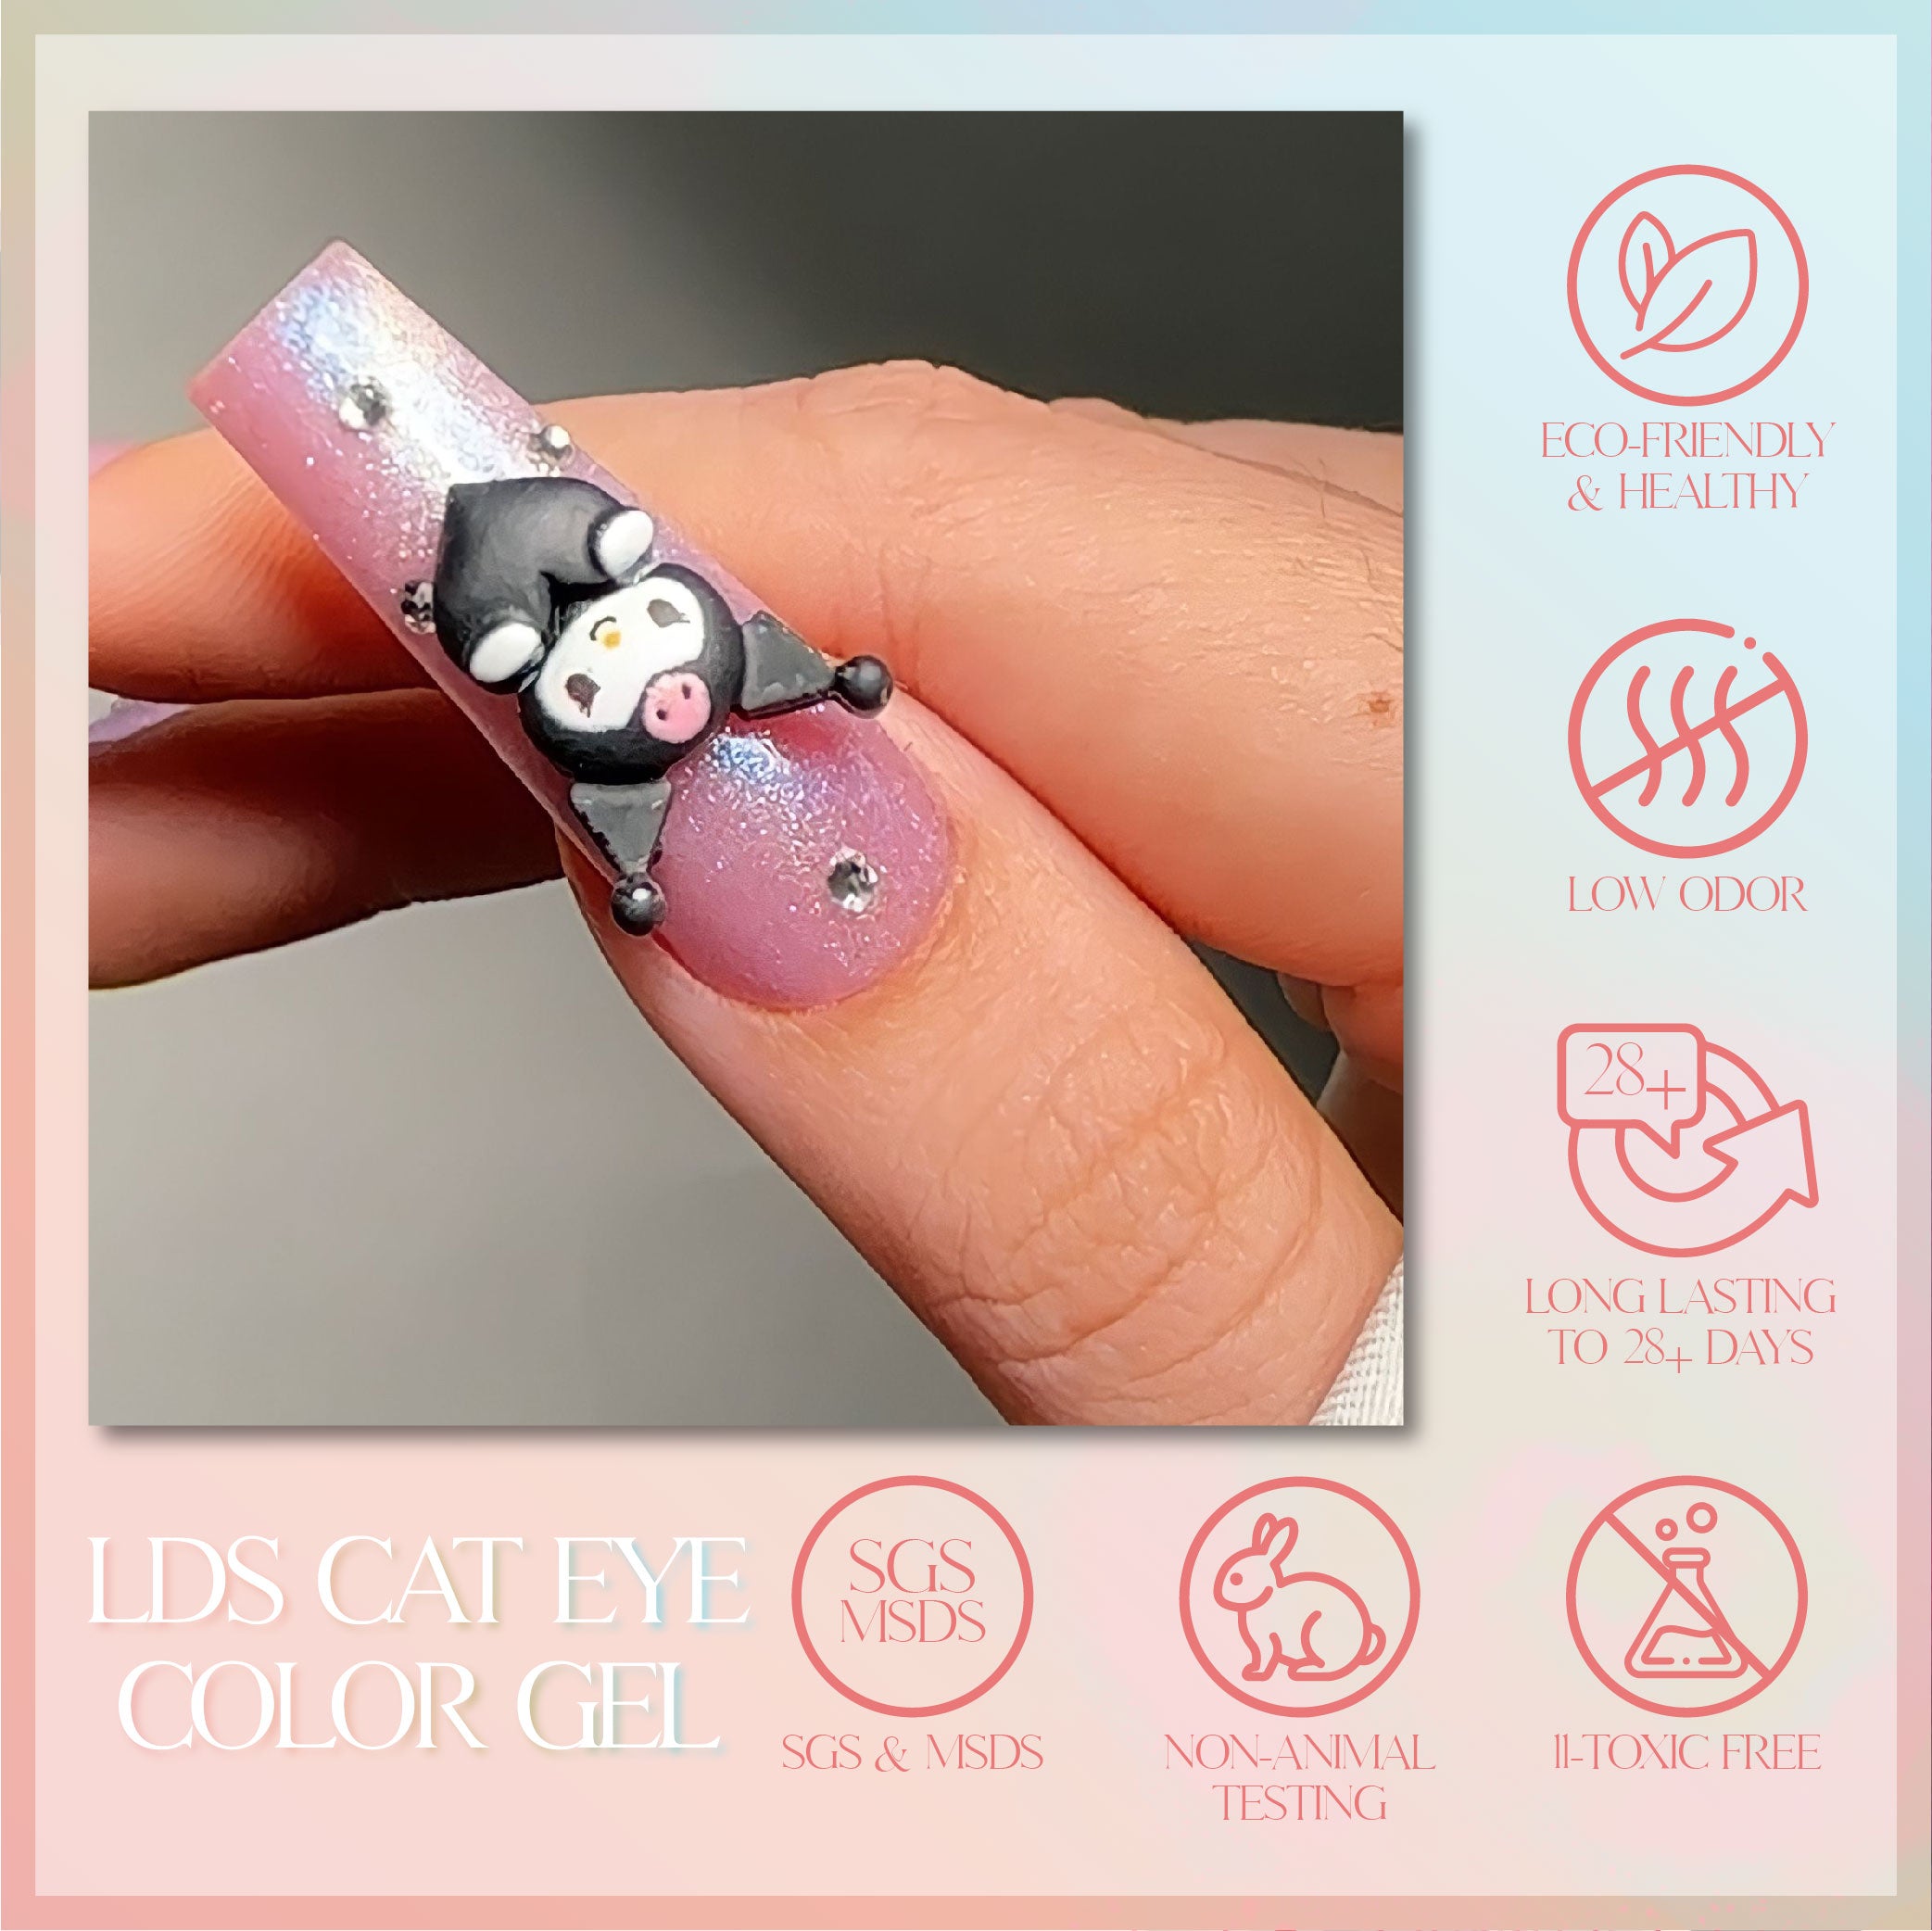 LDS Pearl CE - 11 - Pearl Veil Cat Eye Collection